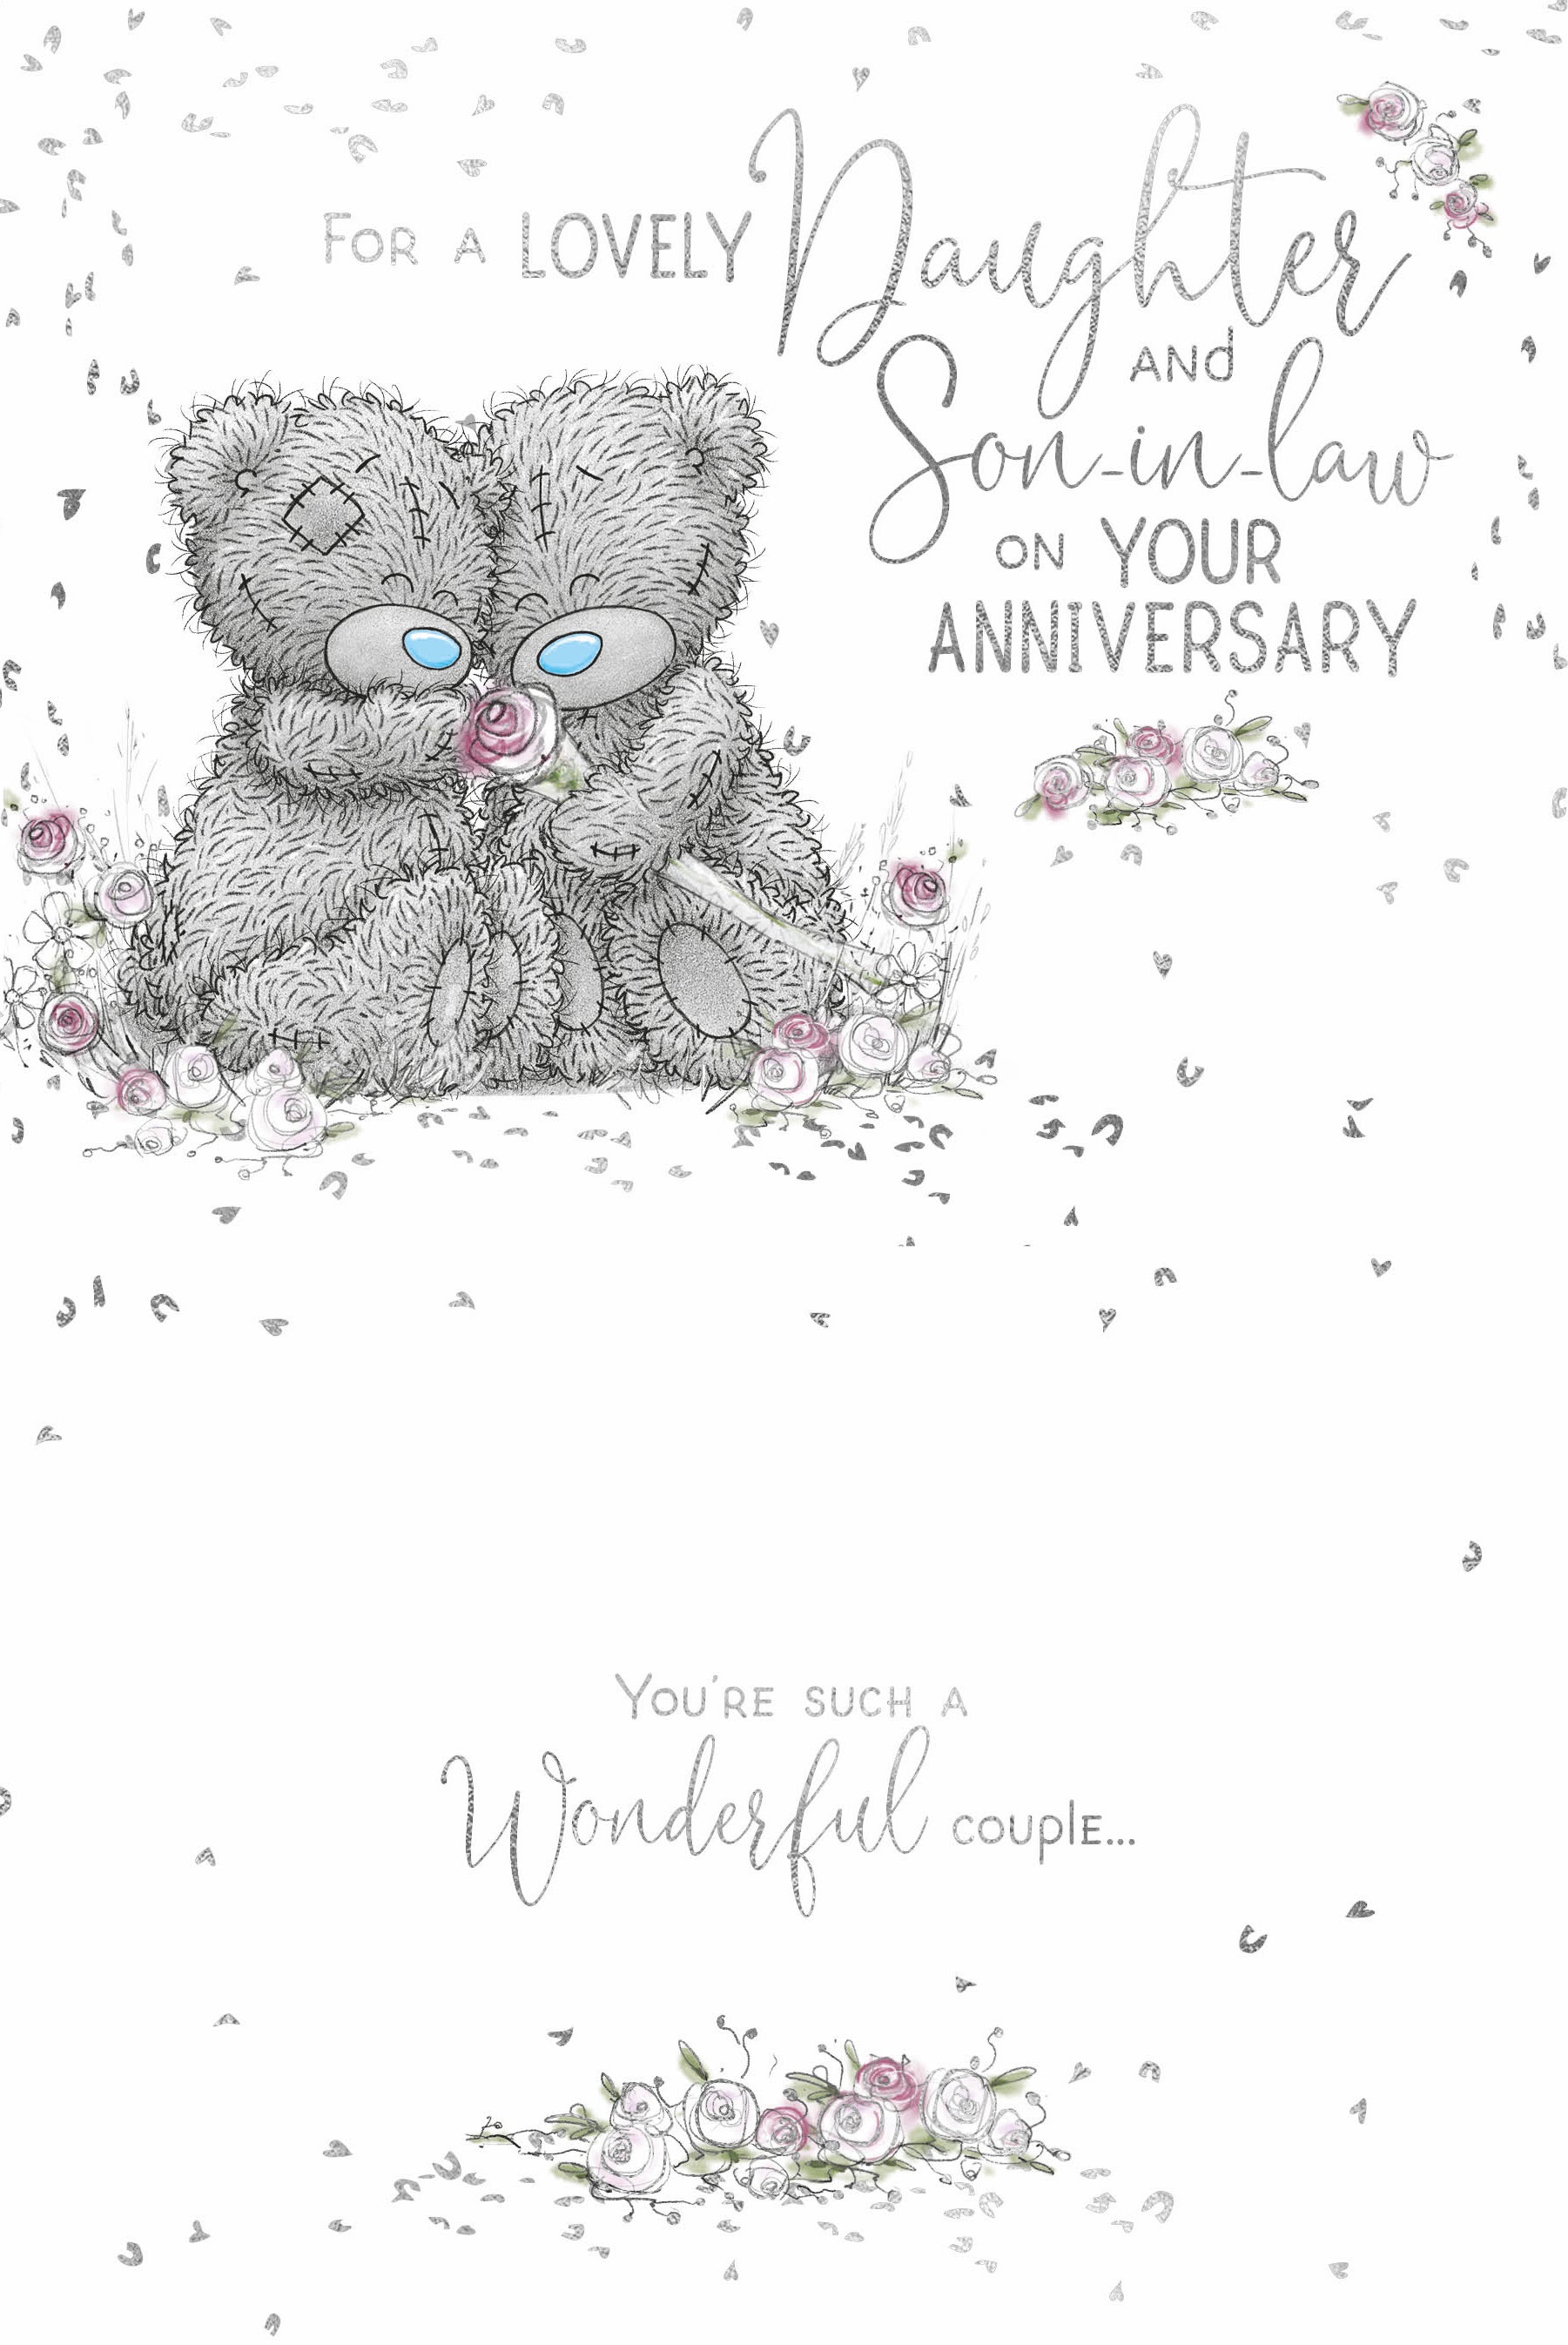 Daughter and Son-In-Law on Your Wedding Anniversary Card - Bears Hugging